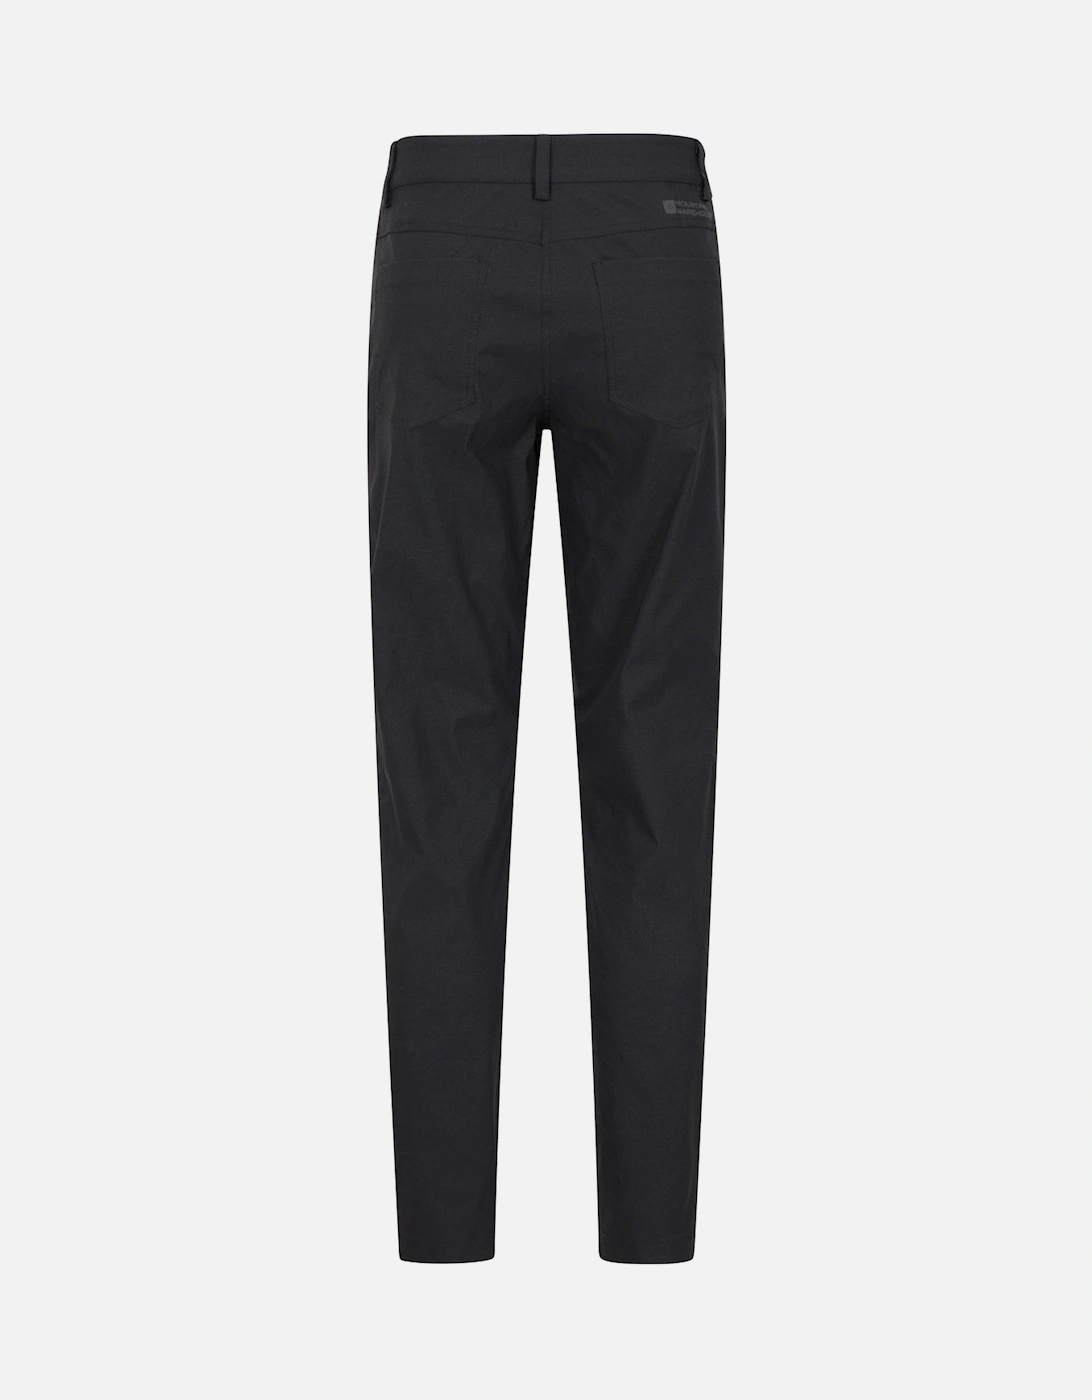 Womens/Ladies Stride Lightweight Fitted Trousers